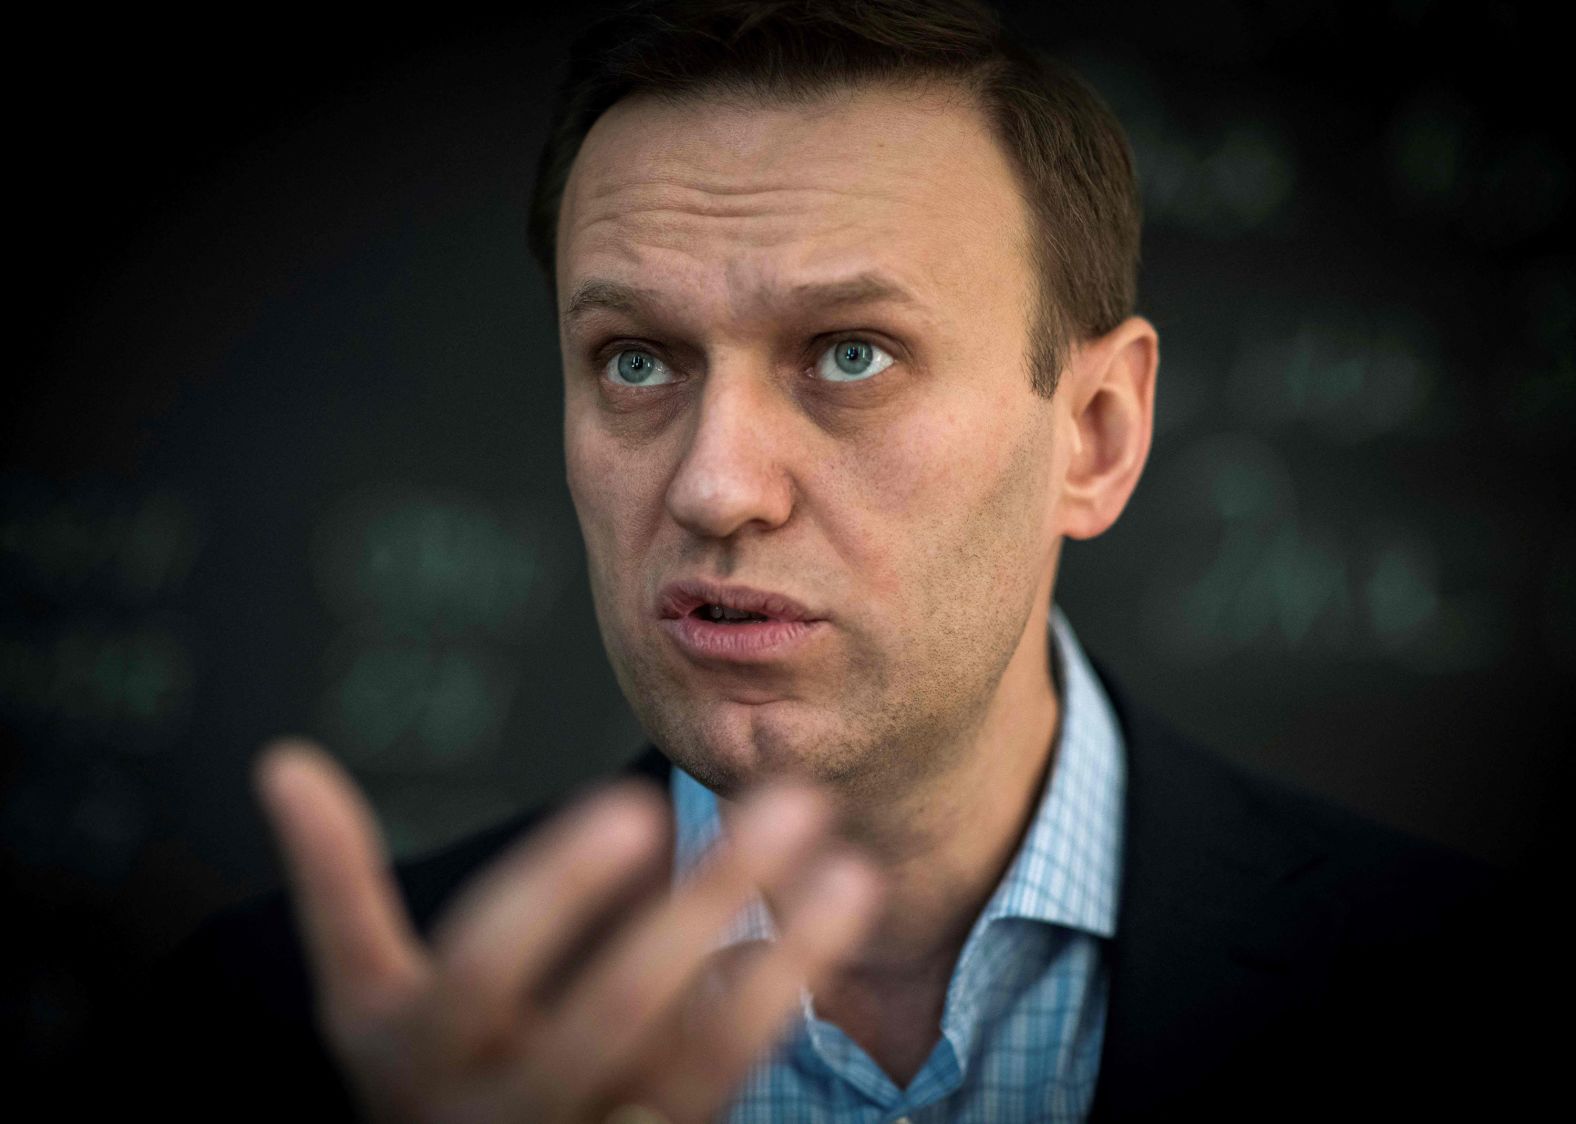 From an office in Moscow, Navalny speaks during an interview with the news organization Agence France-Presse in January 2018. A Moscow court had ordered the closure of his Anti-Corruption Foundation. The foundation's lawyers were appealing.